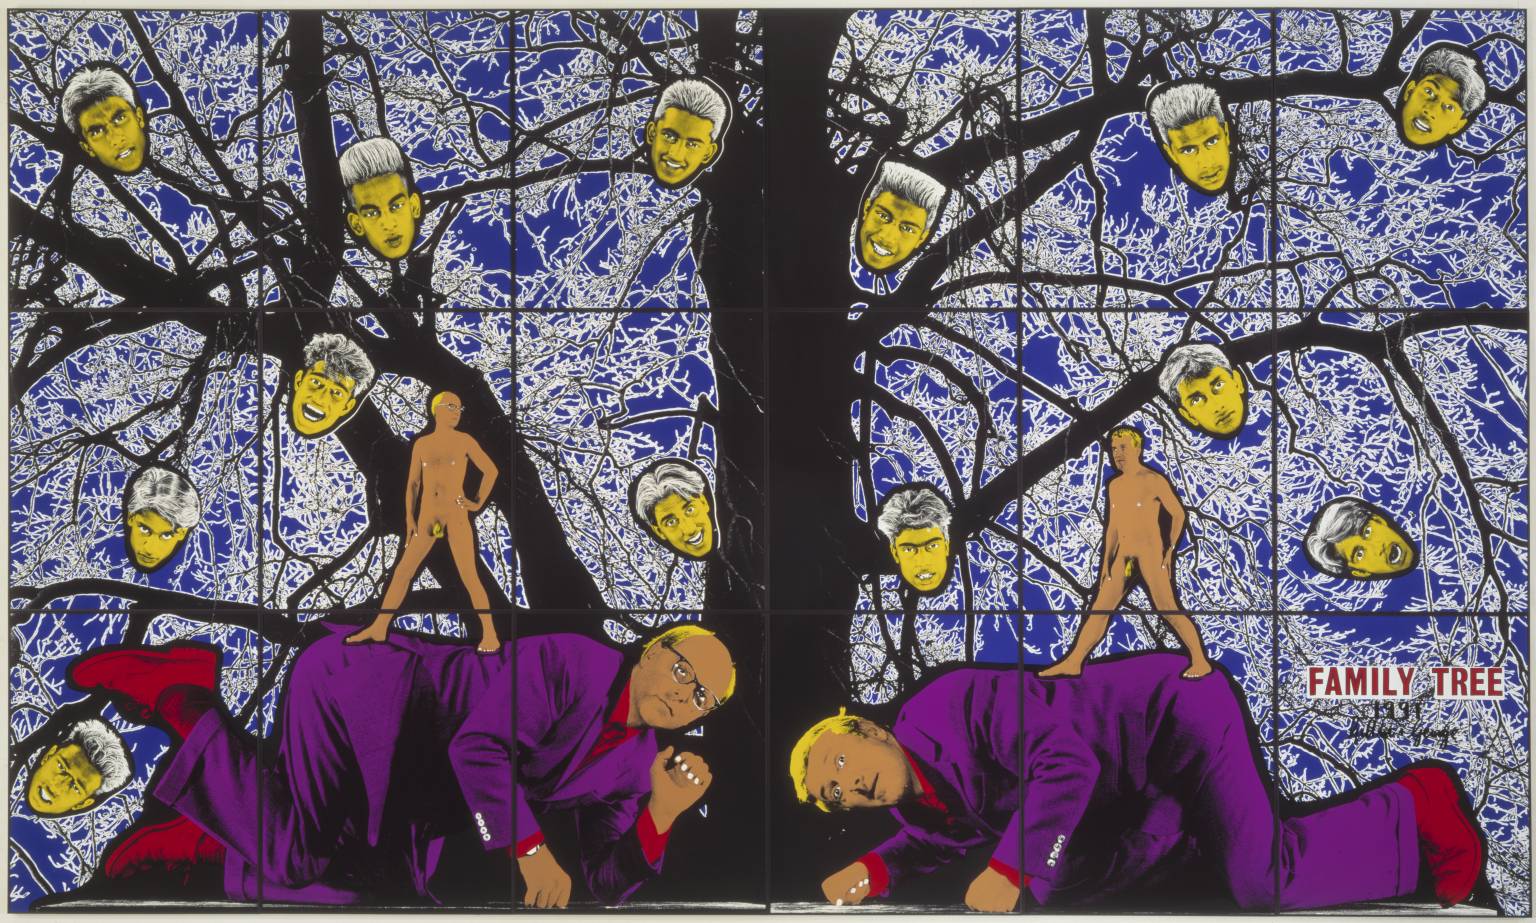 Family Tree 1991 by Gilbert & George born 1943, born 1942